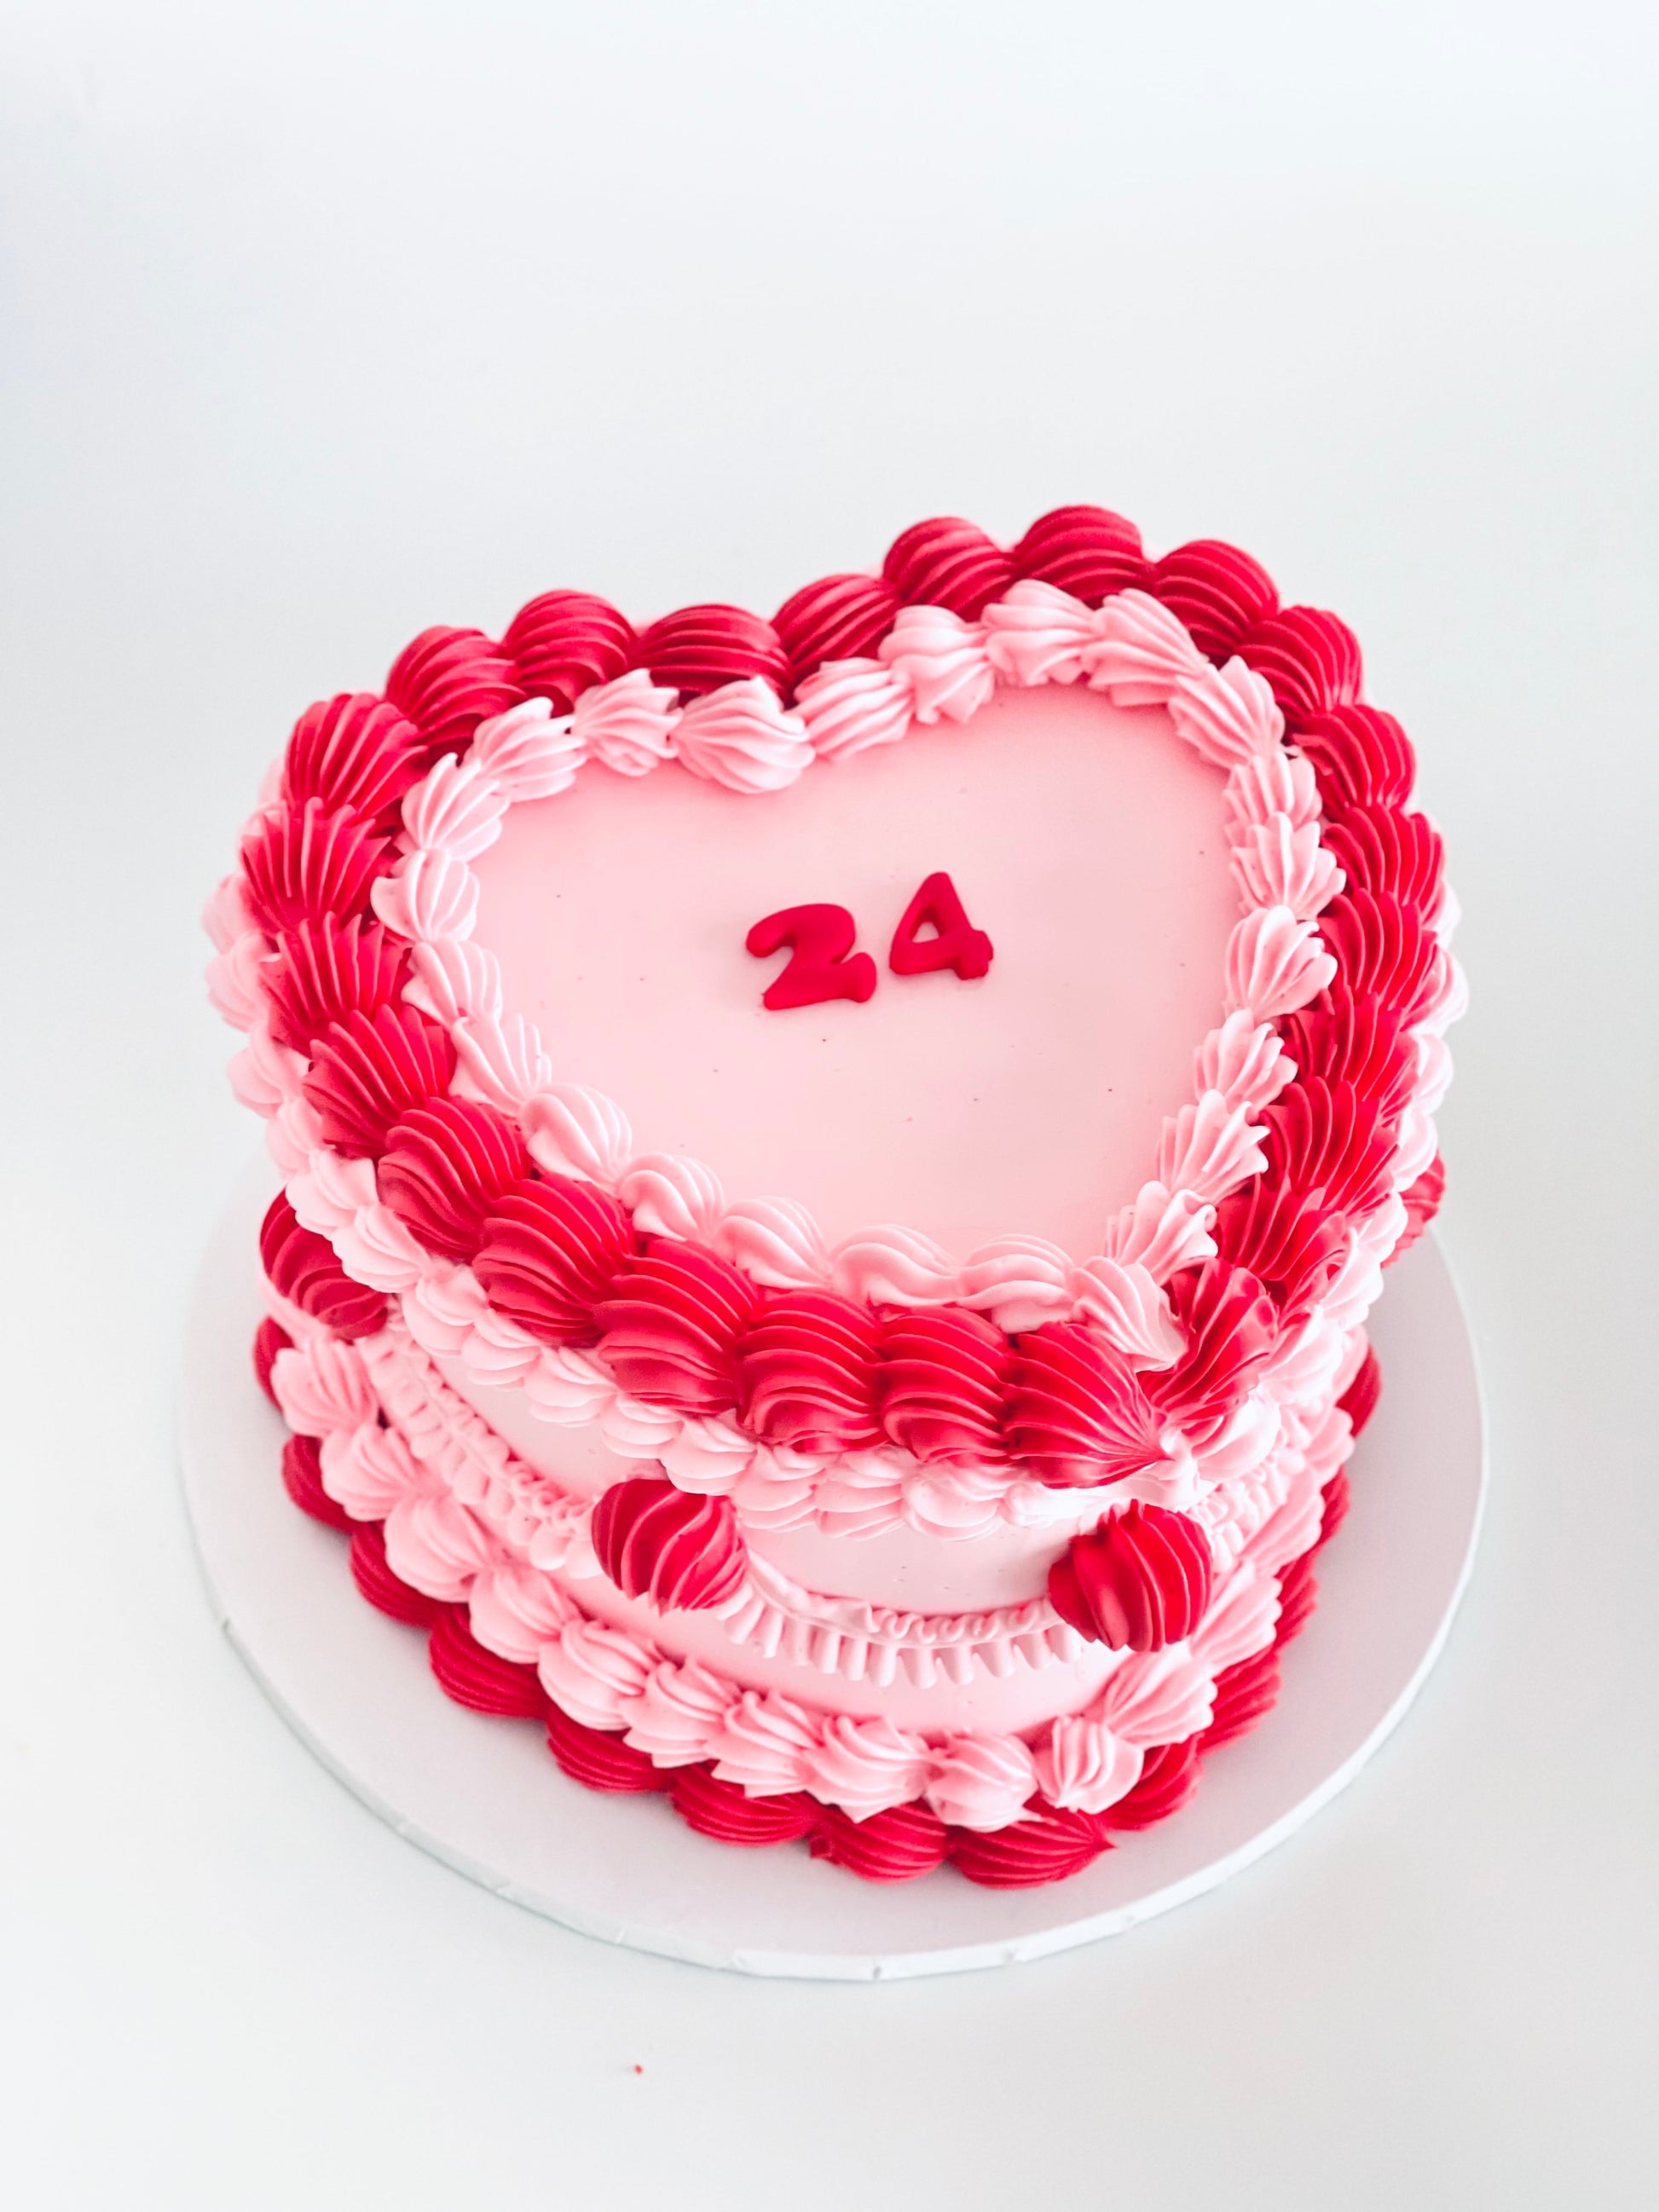 pink vintage heart shape cake with birthday number